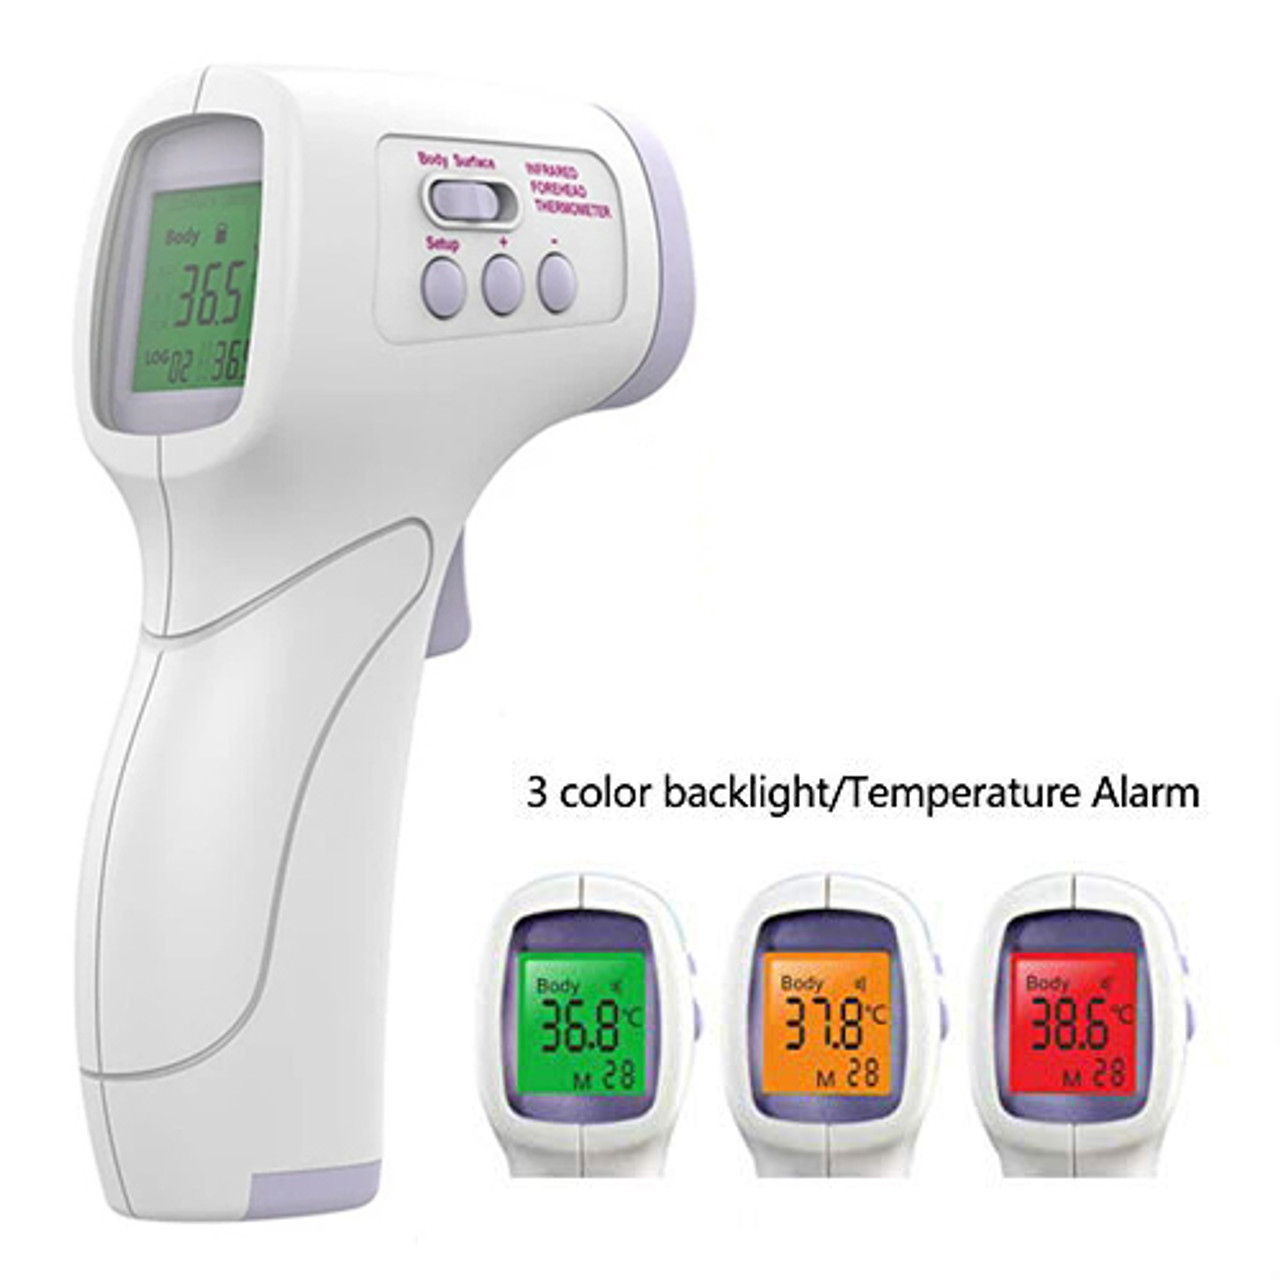 Concord Non-Contact Infrared 3-in-1 Thermometer. Measures Body, Surface and Room Temperature